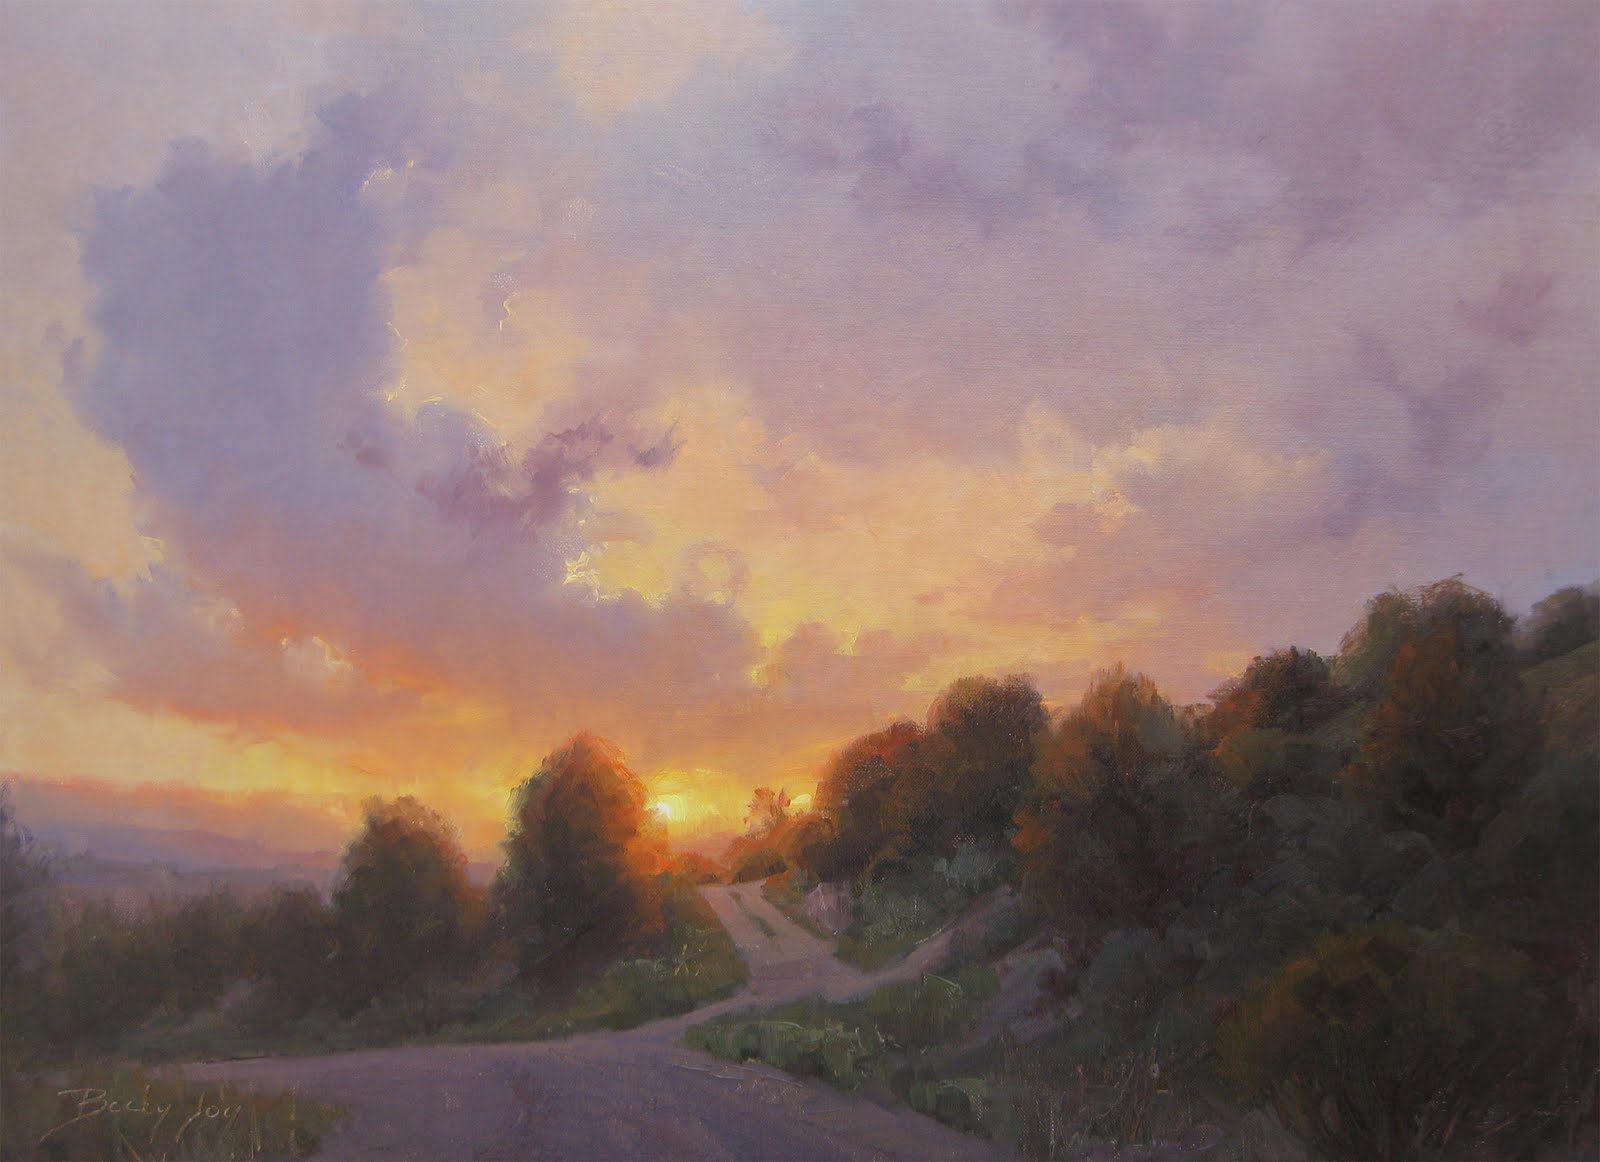 Daily Painters of Arizona Big Sky oil paintings by BECKY JOY